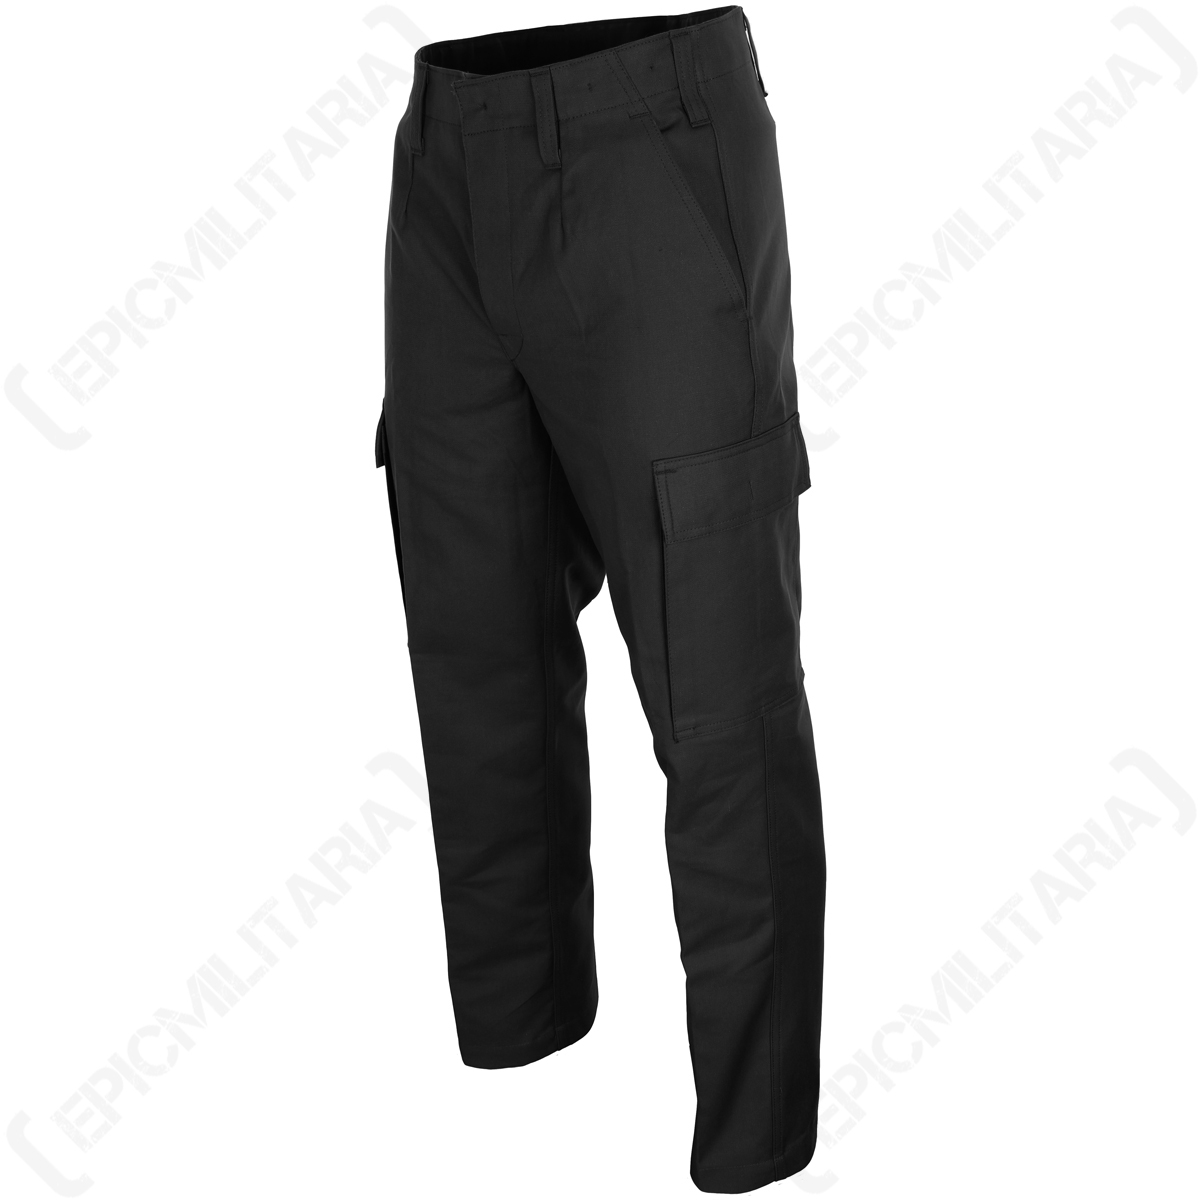 Buy Mens Moleskin Trousers  Fast UK Delivery  Insight Clothing